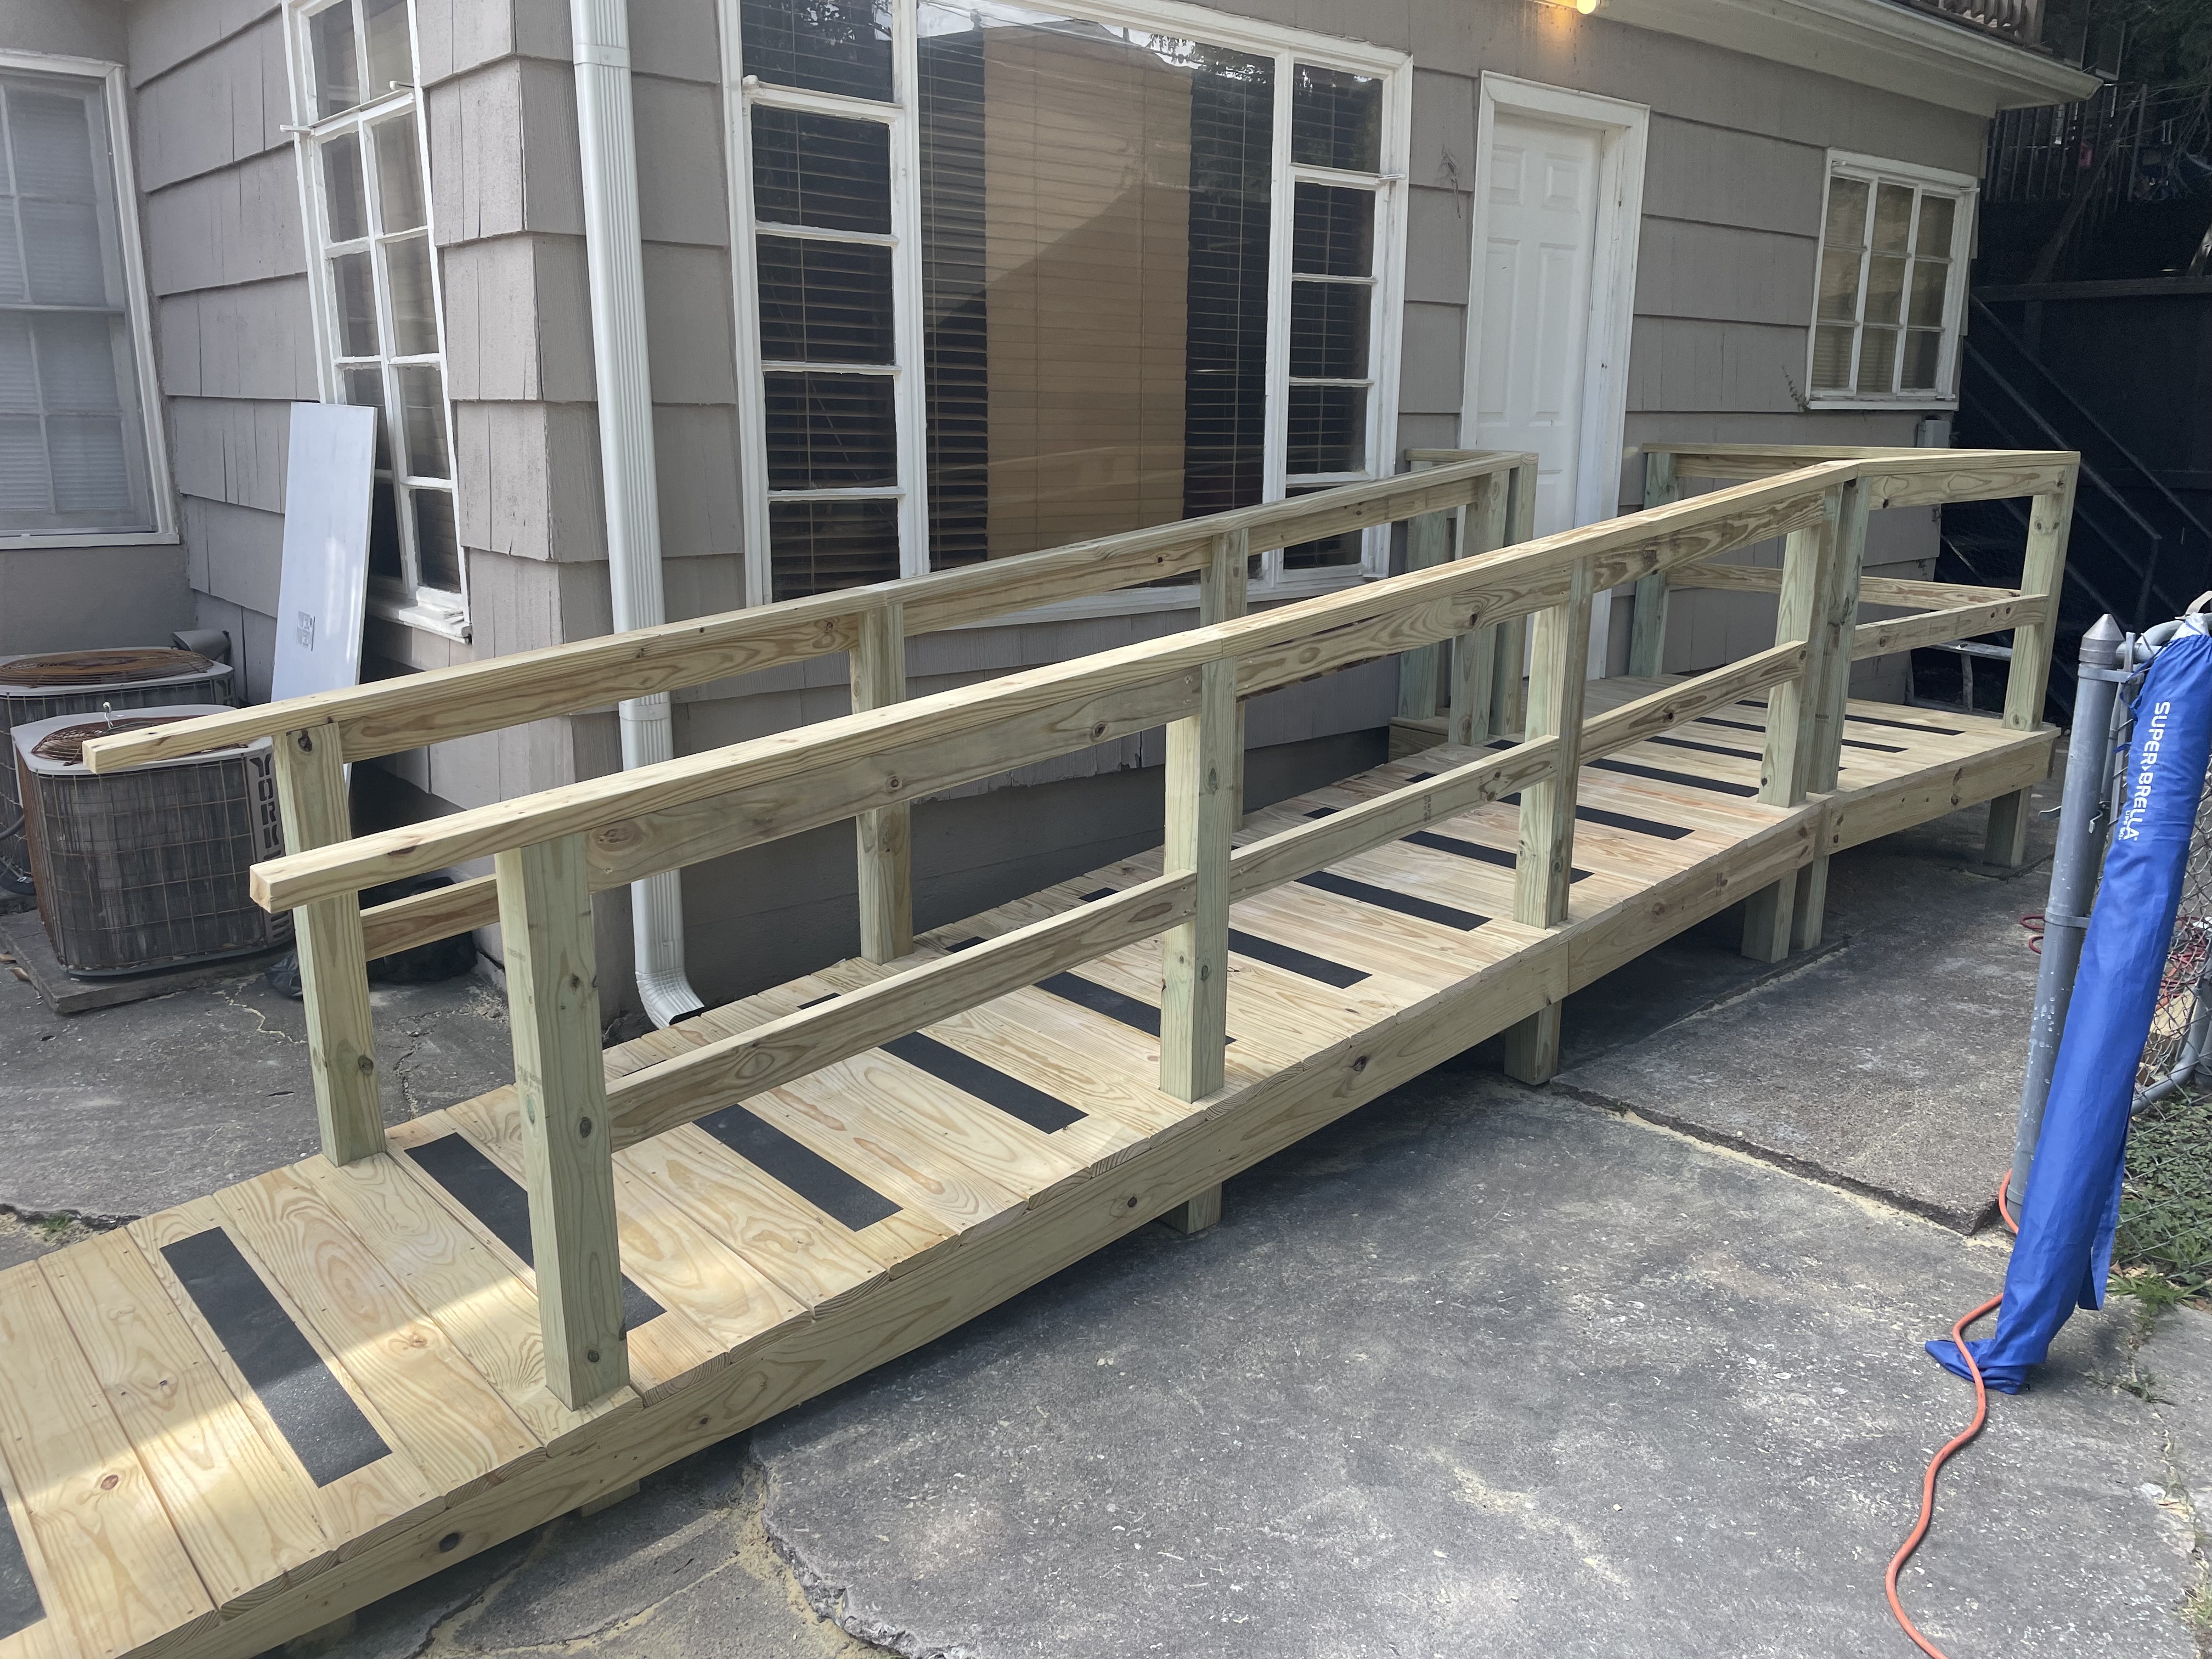 A ramp installed by LiveWell